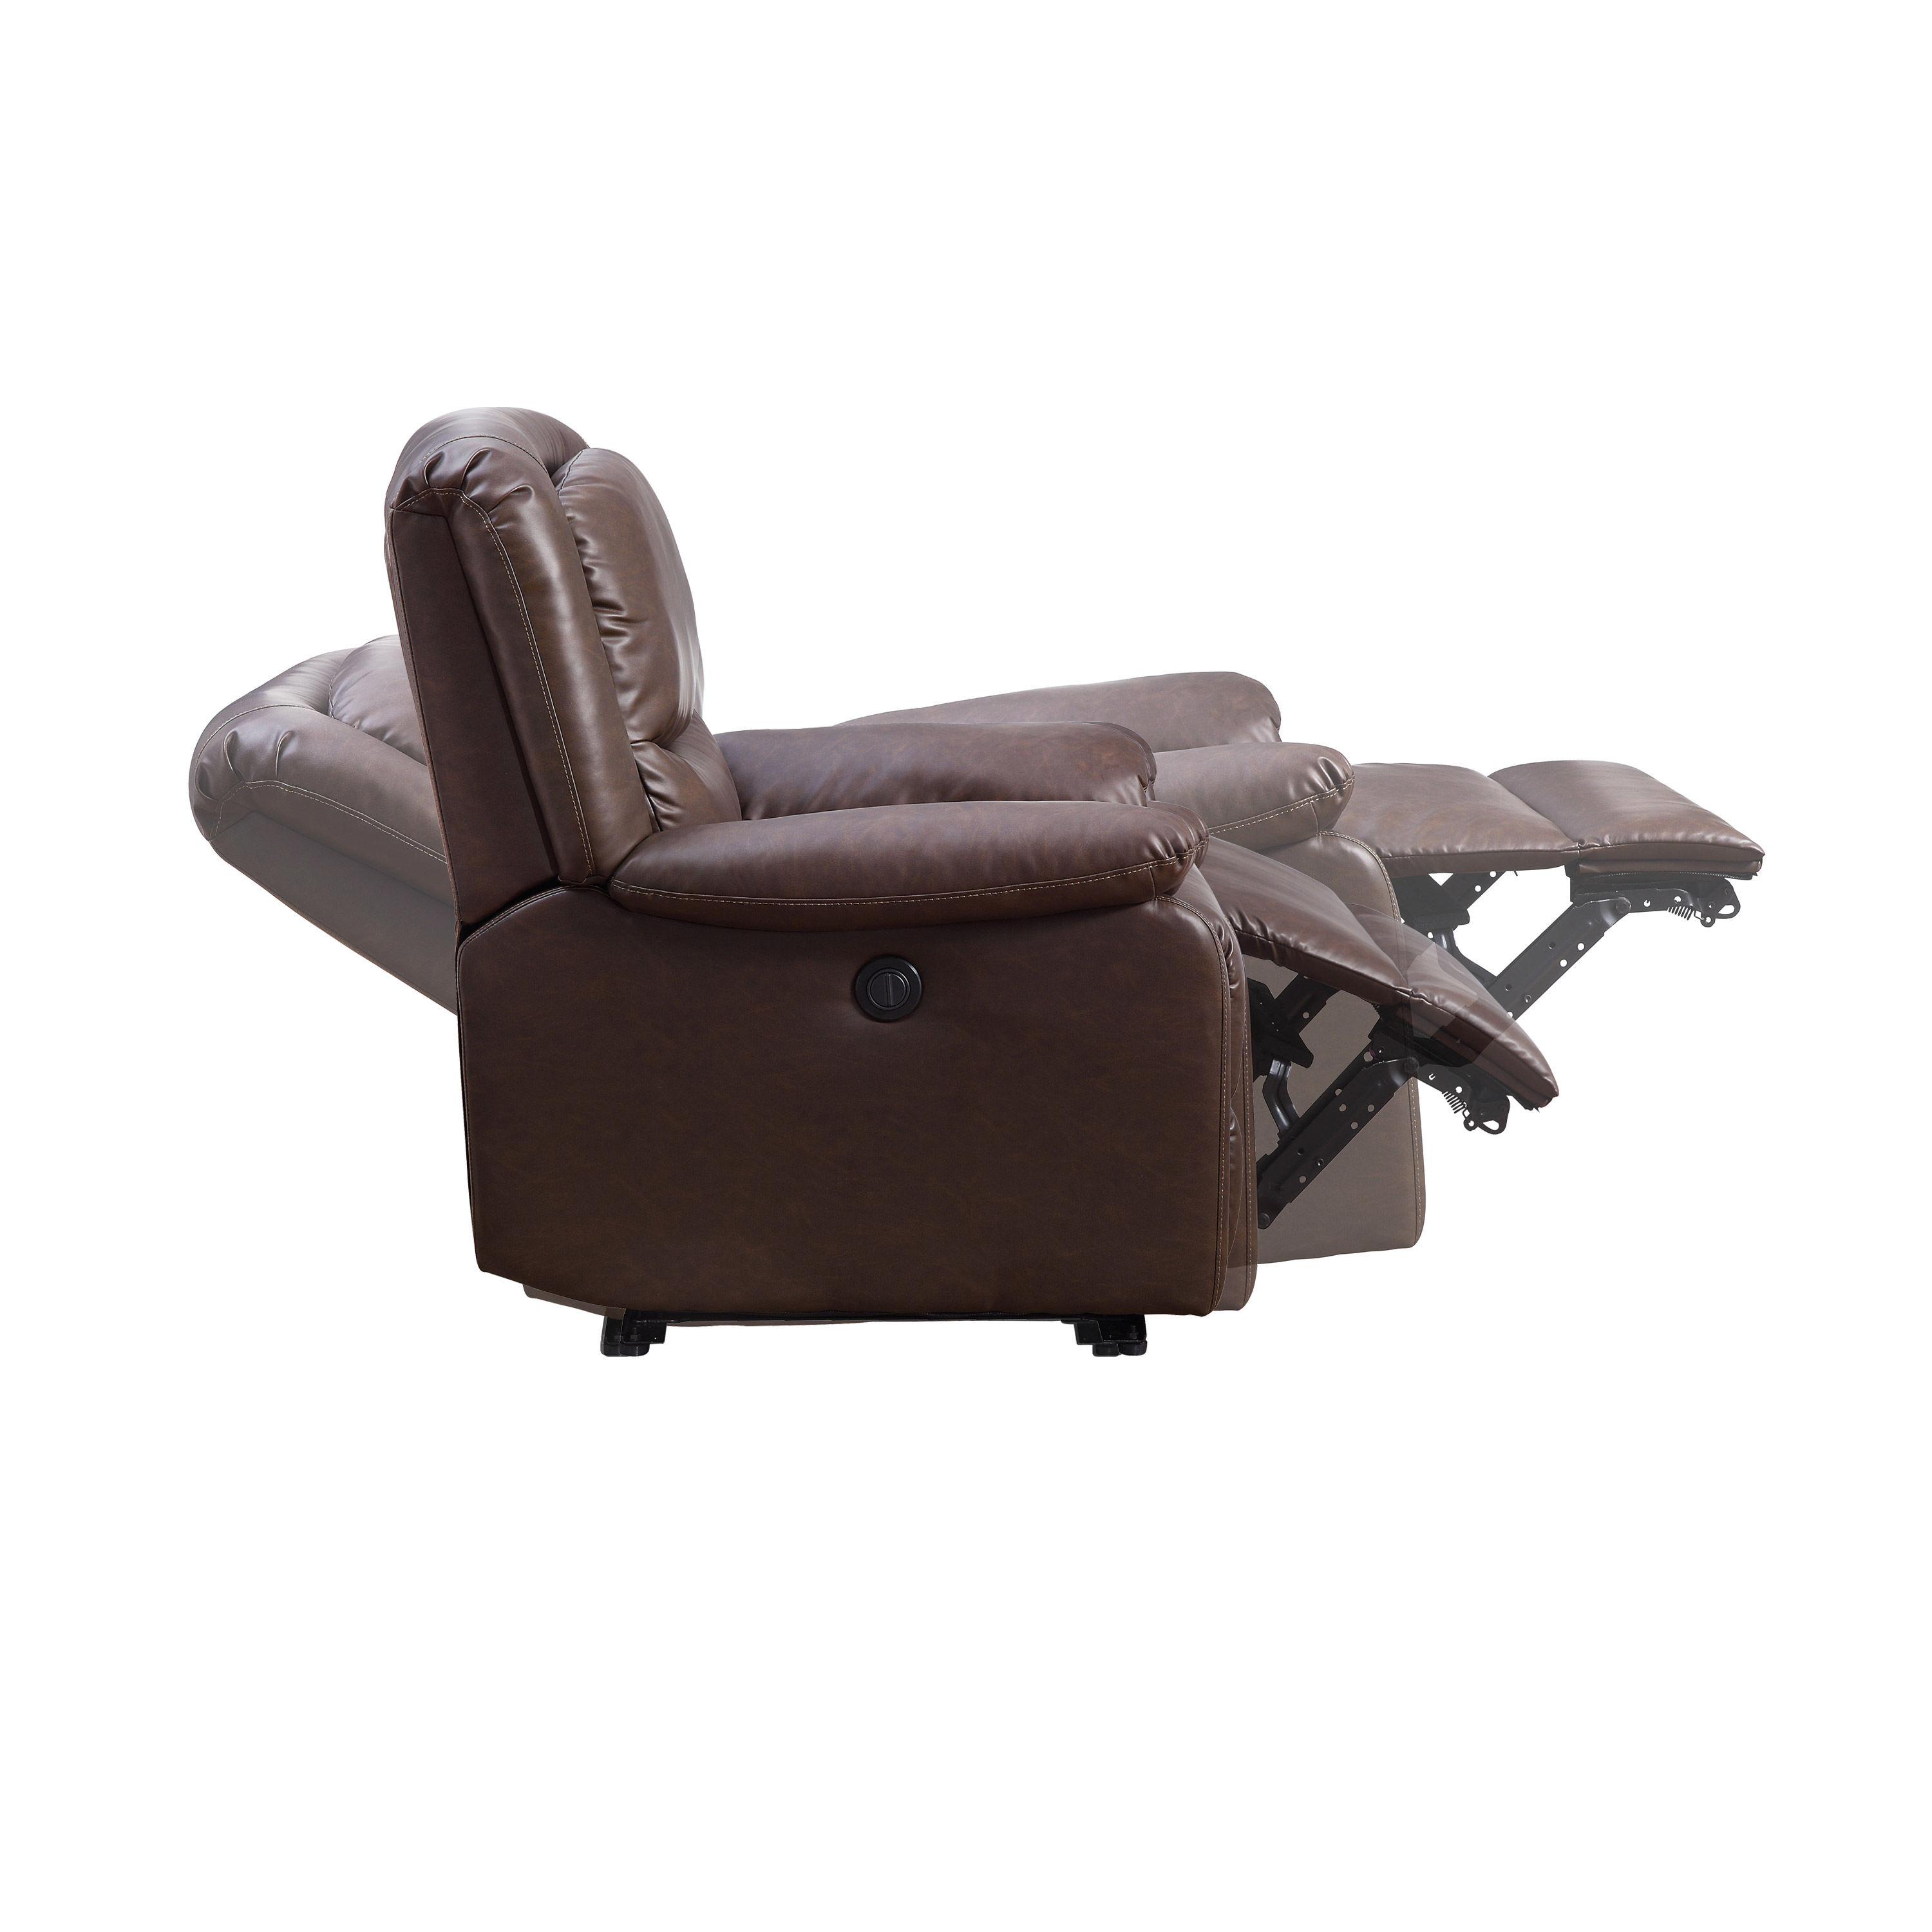 Serta Push-Button Power Recliner with Deep Body Cushions, Brown Faux Leather Upholstery - image 3 of 9